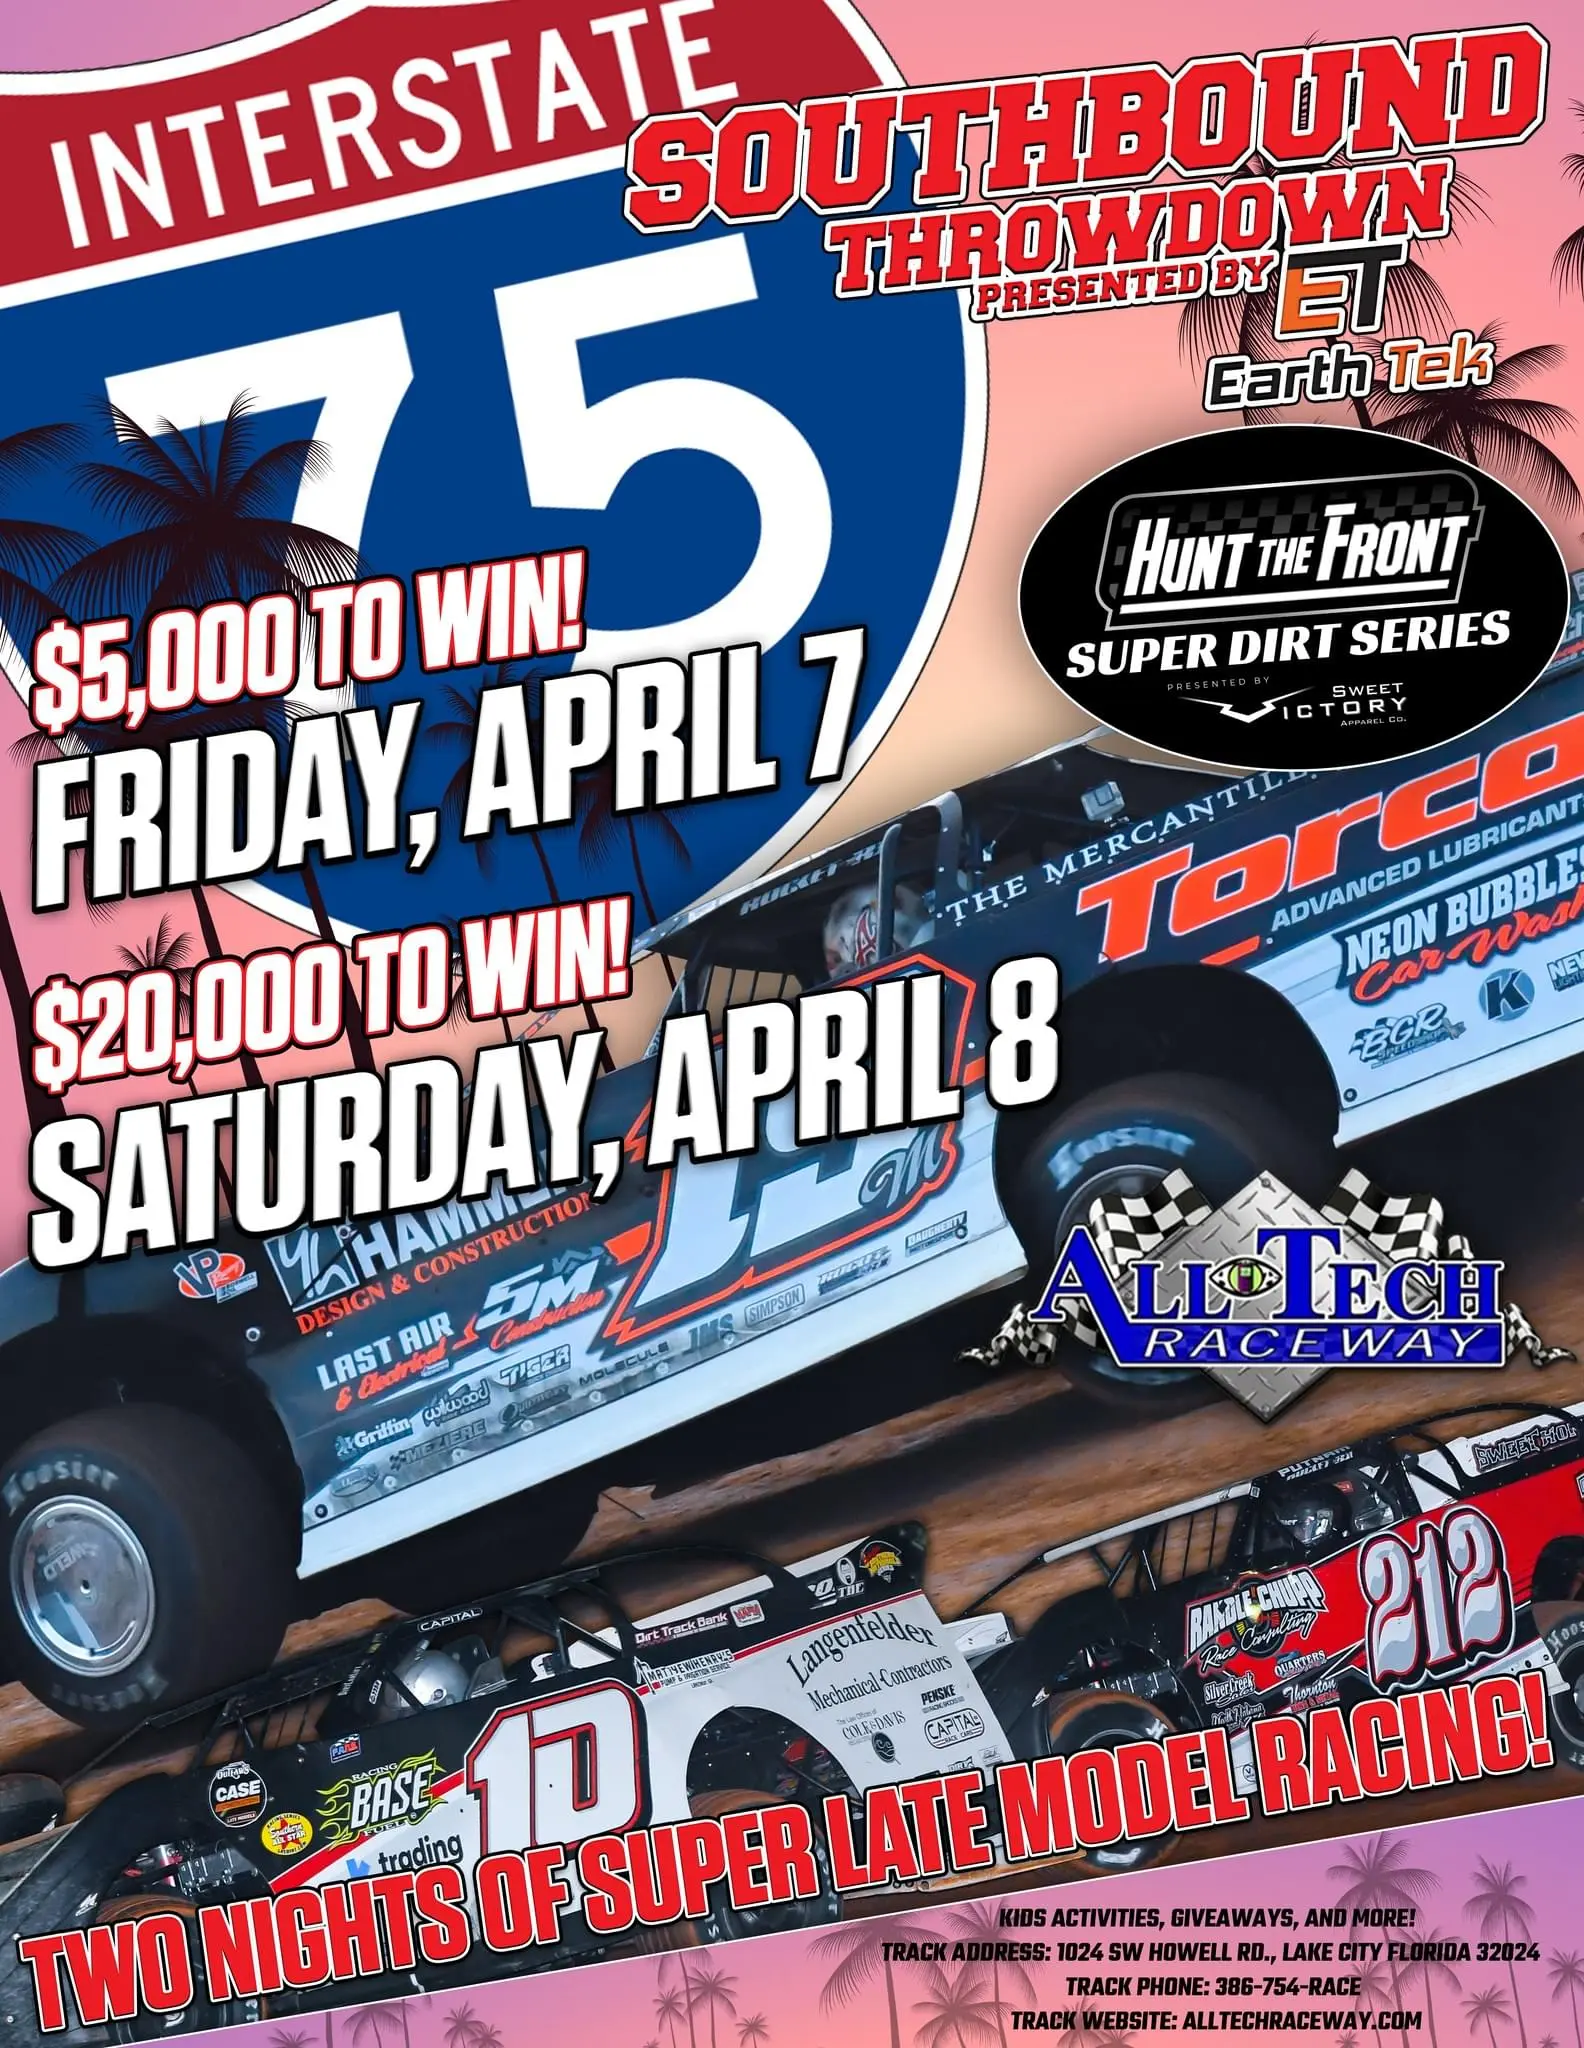 Hunt the Front Super Dirt Series Opening Weekend Winner’s Purse Set at $25,000